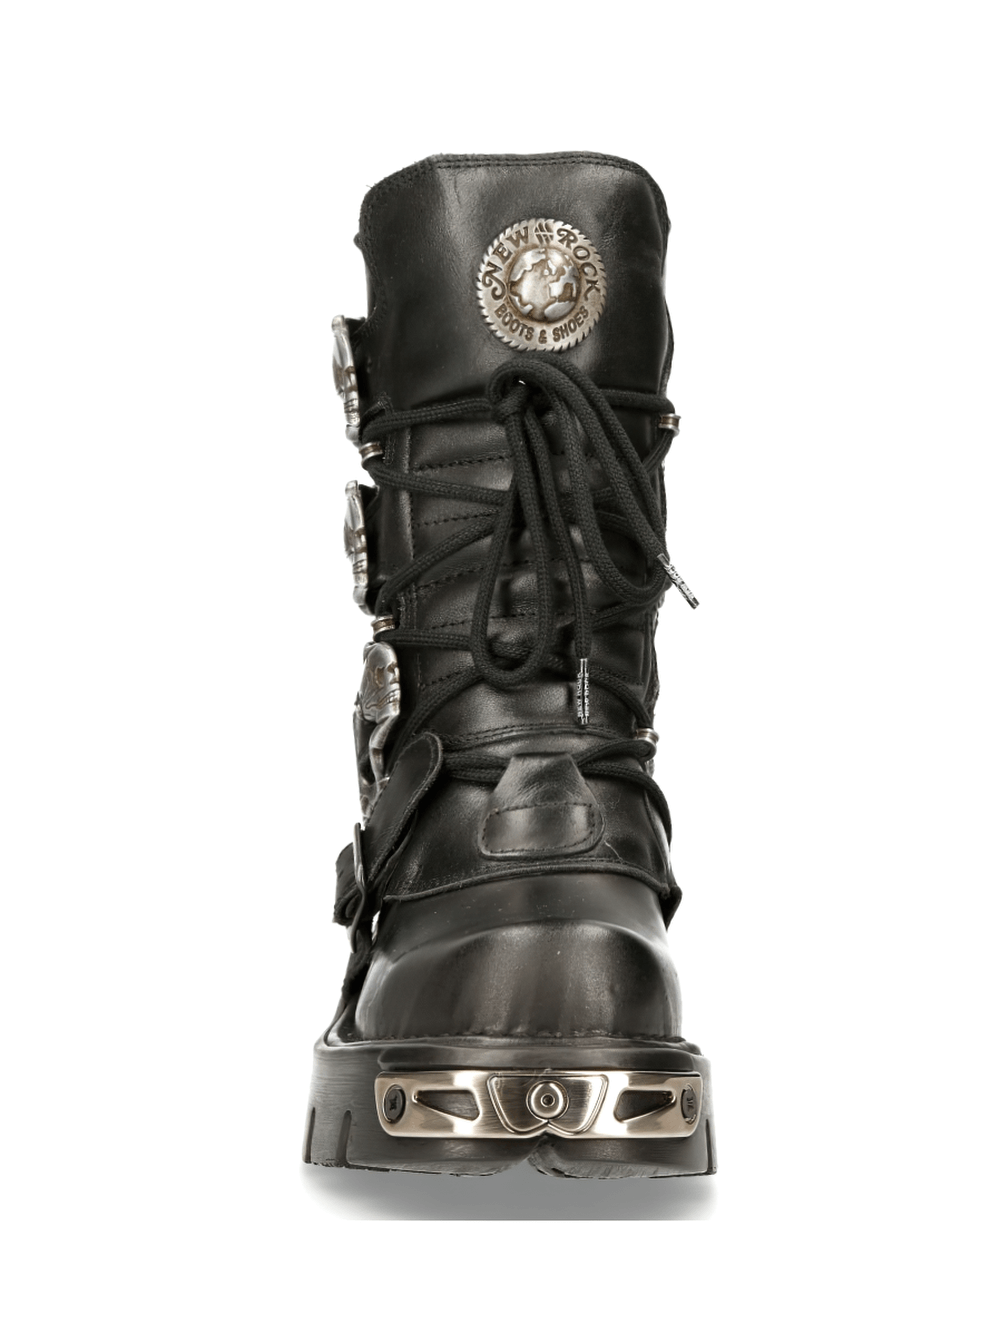 NEW ROCK Rugged Black Reactor Buckle-Laced Boots